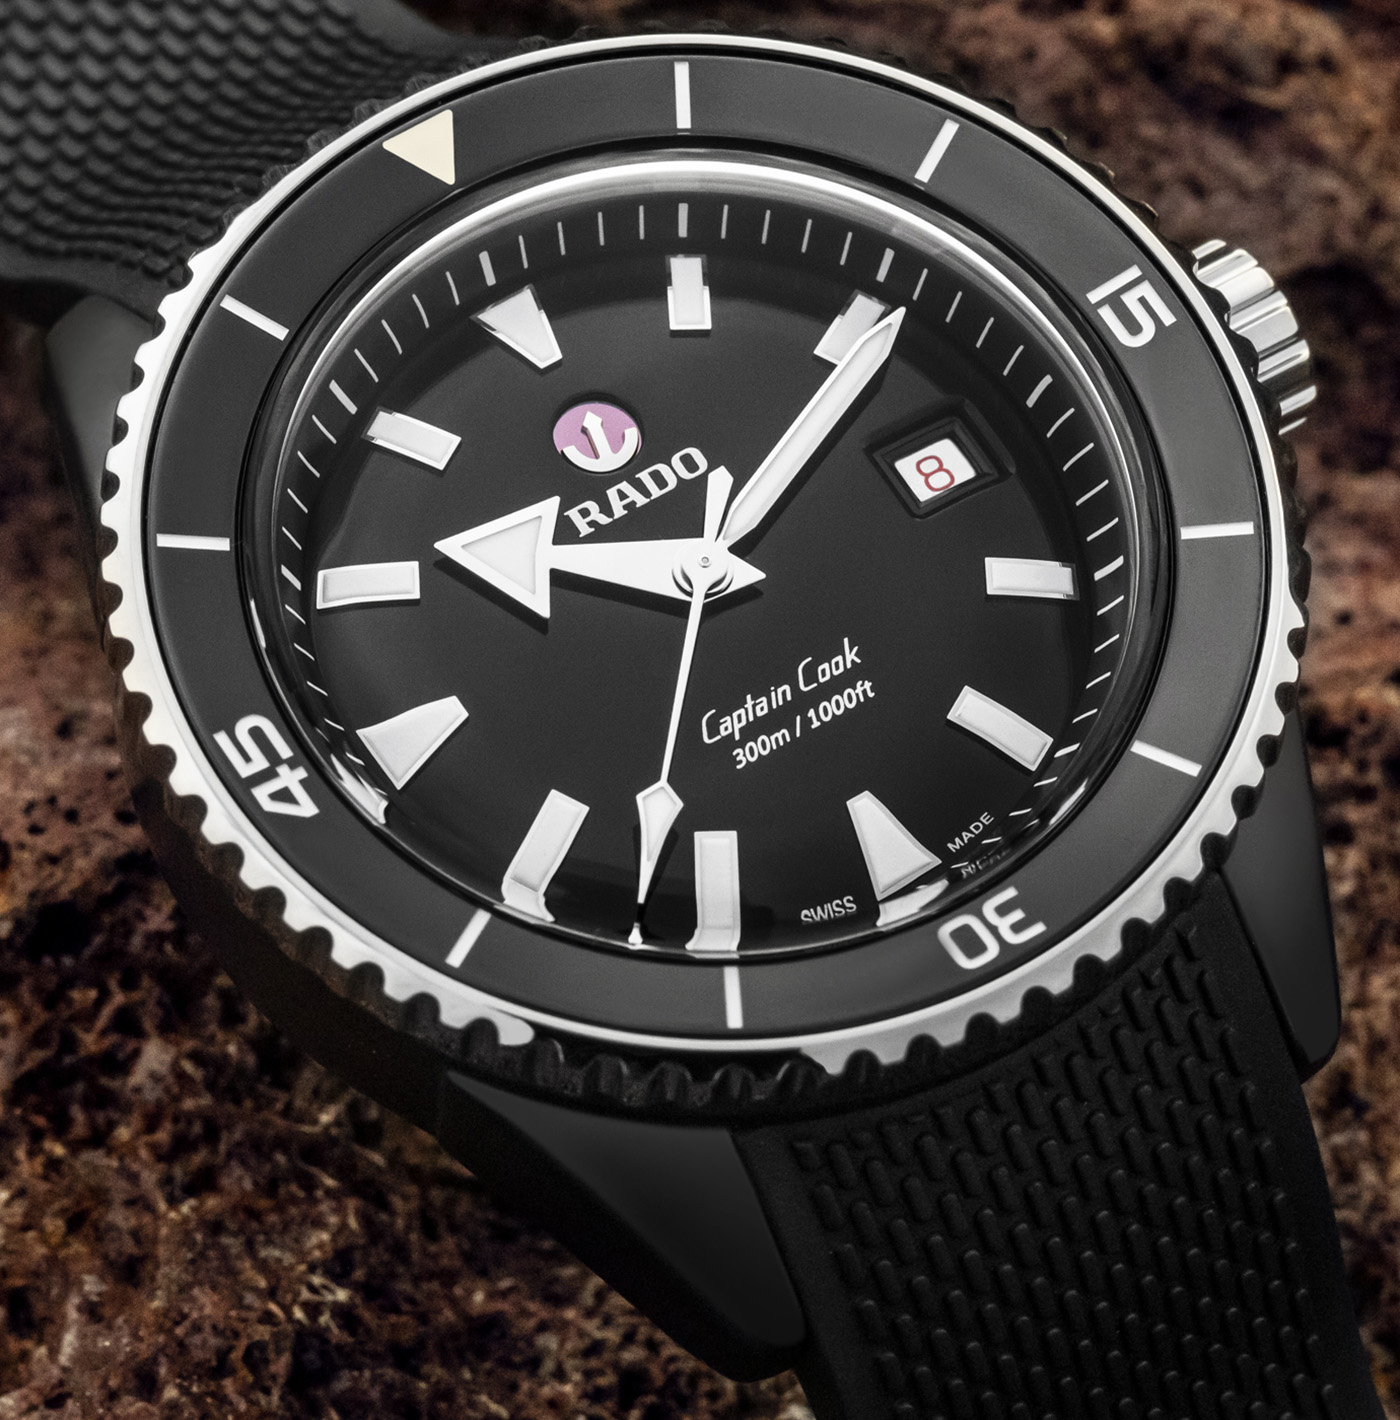 Rado Captain Cook Ceramic diver - Perfect readability of the dial thanks to the sapphire crystal with double anti-reflective coating and indexes and hands with Super-Luminova